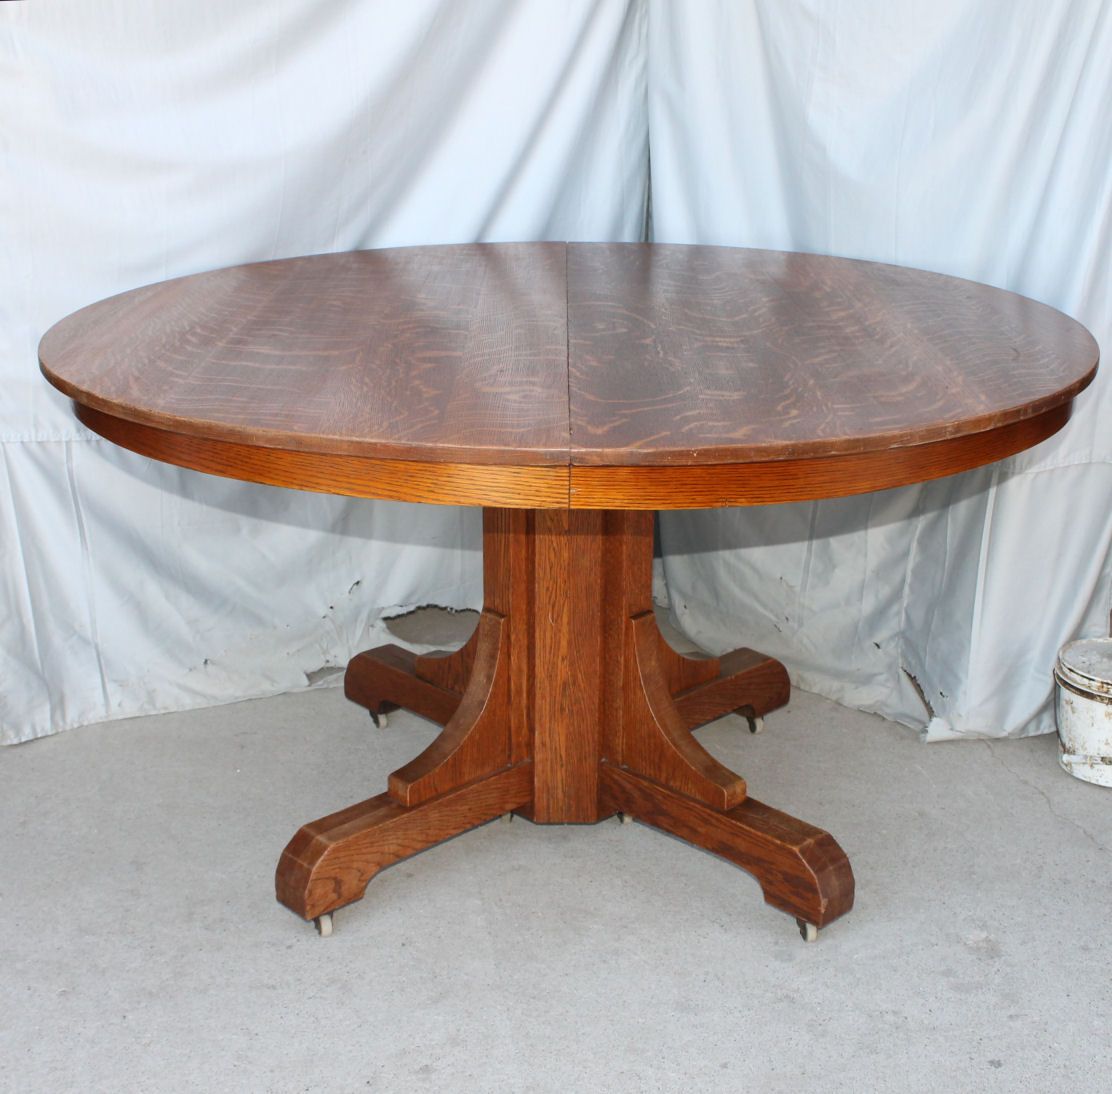 Bargain John'S Antiques | Antique Mission Oak Round Dining Inside Most Current Antique Oak Dining Tables (View 1 of 15)